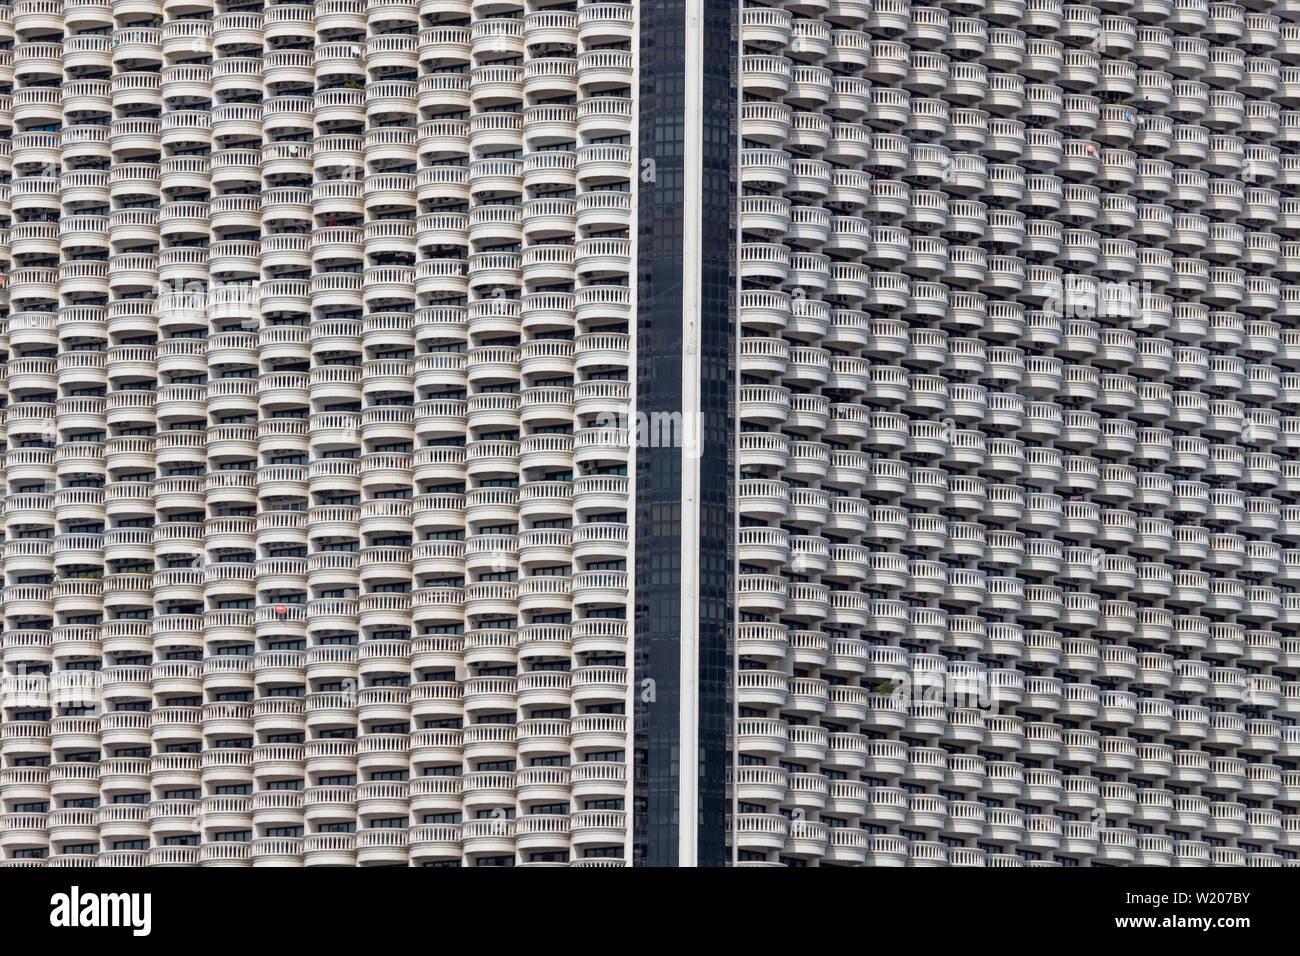 Bangkok, Thailand - April 14, 2019:  Details of many balconies at State tower skyscraper Stock Photo